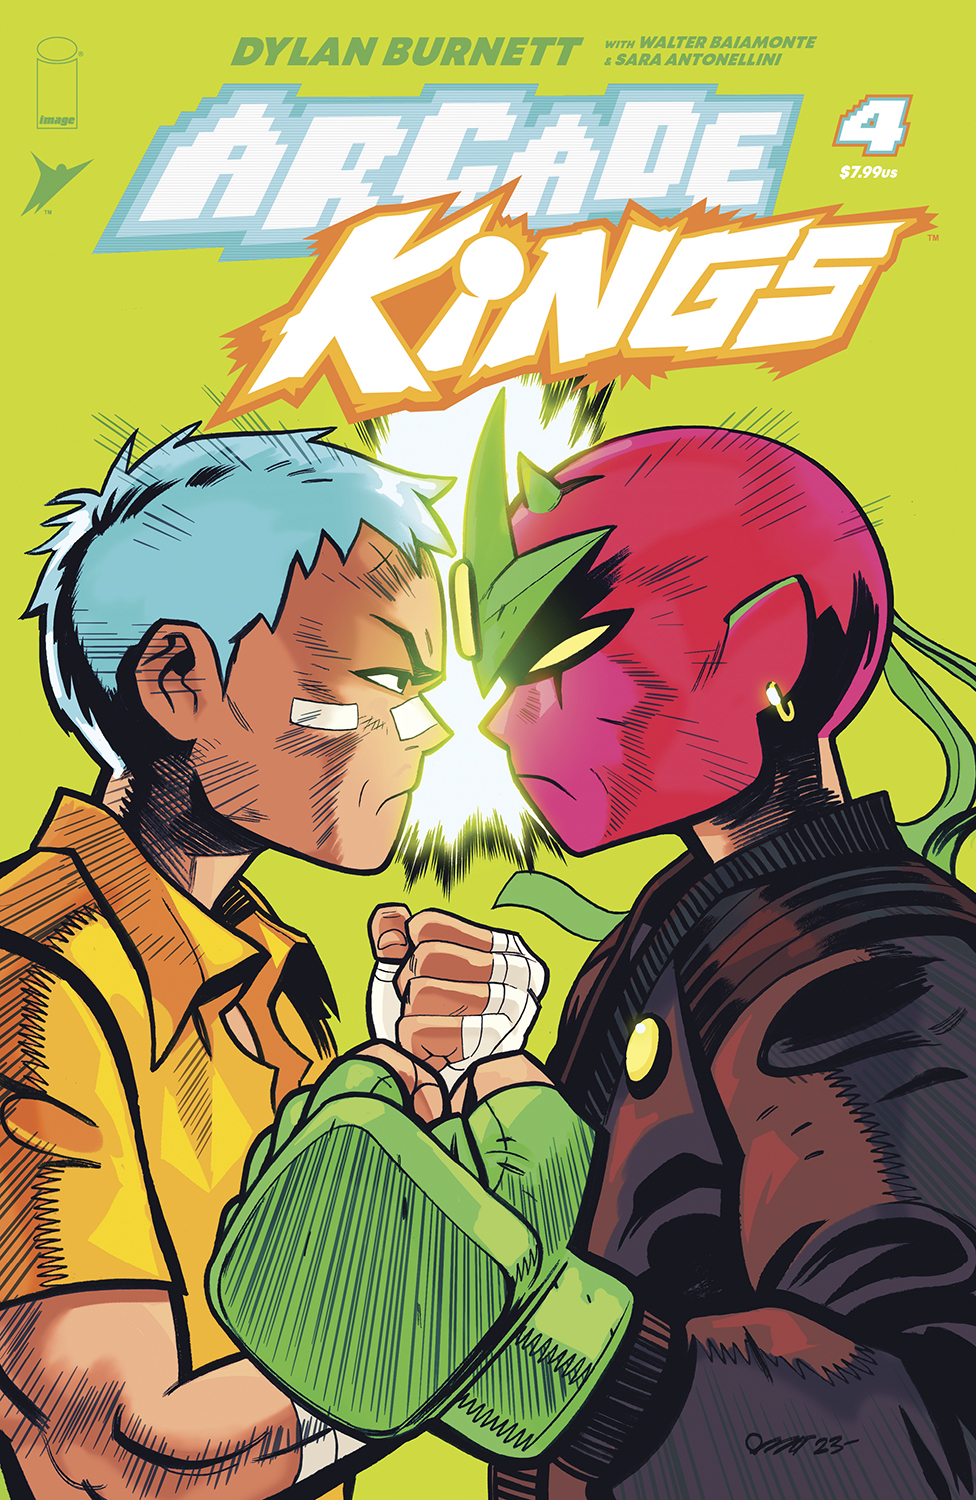 Arcade Kings #4 Cover A (Of 5)